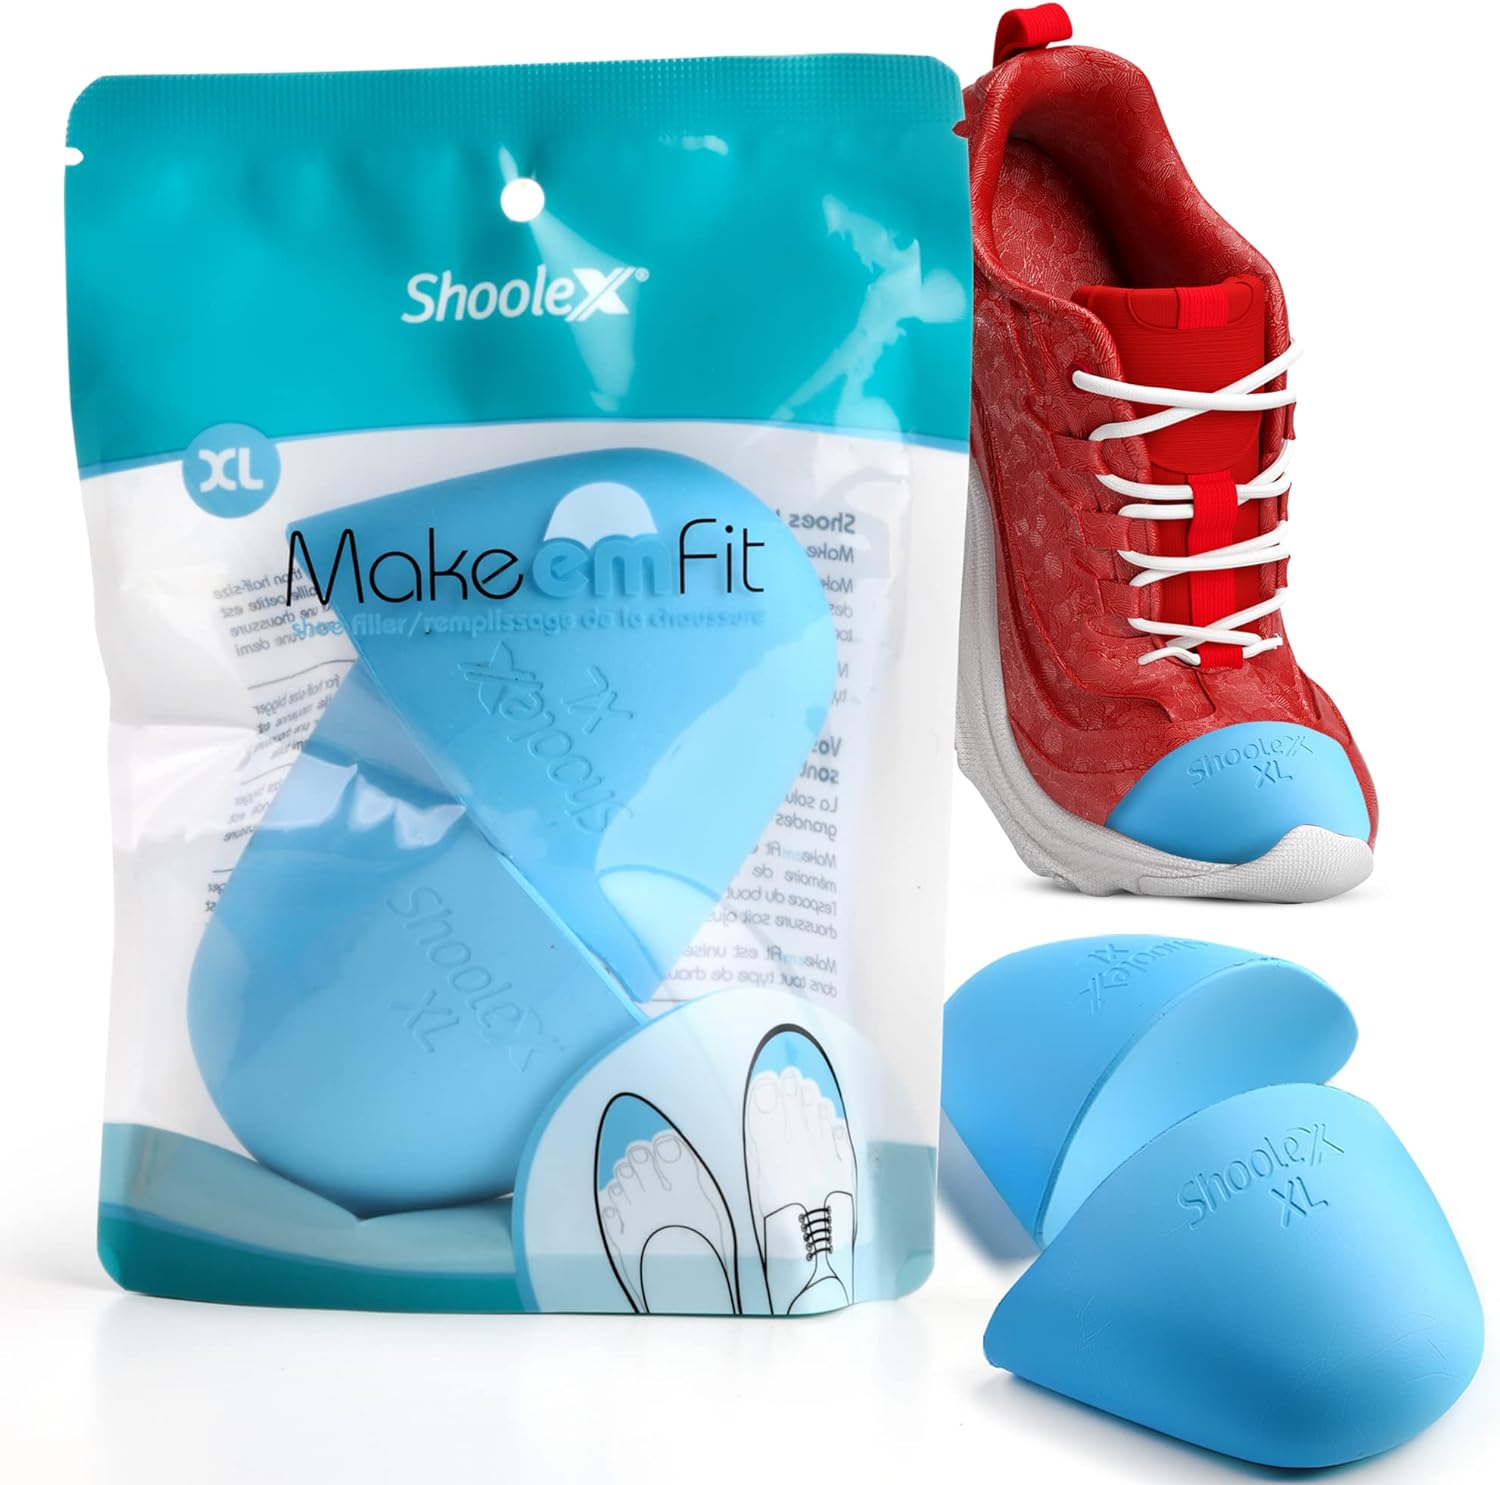 Shoolex Shoe Filler for Too Big Shoes Men/Women Toe Cushion Insert to Make Shoes Fit Tighter Memory Foam Shoe Size Reducer for Sport Dress Casual High Heels and Boots X Large